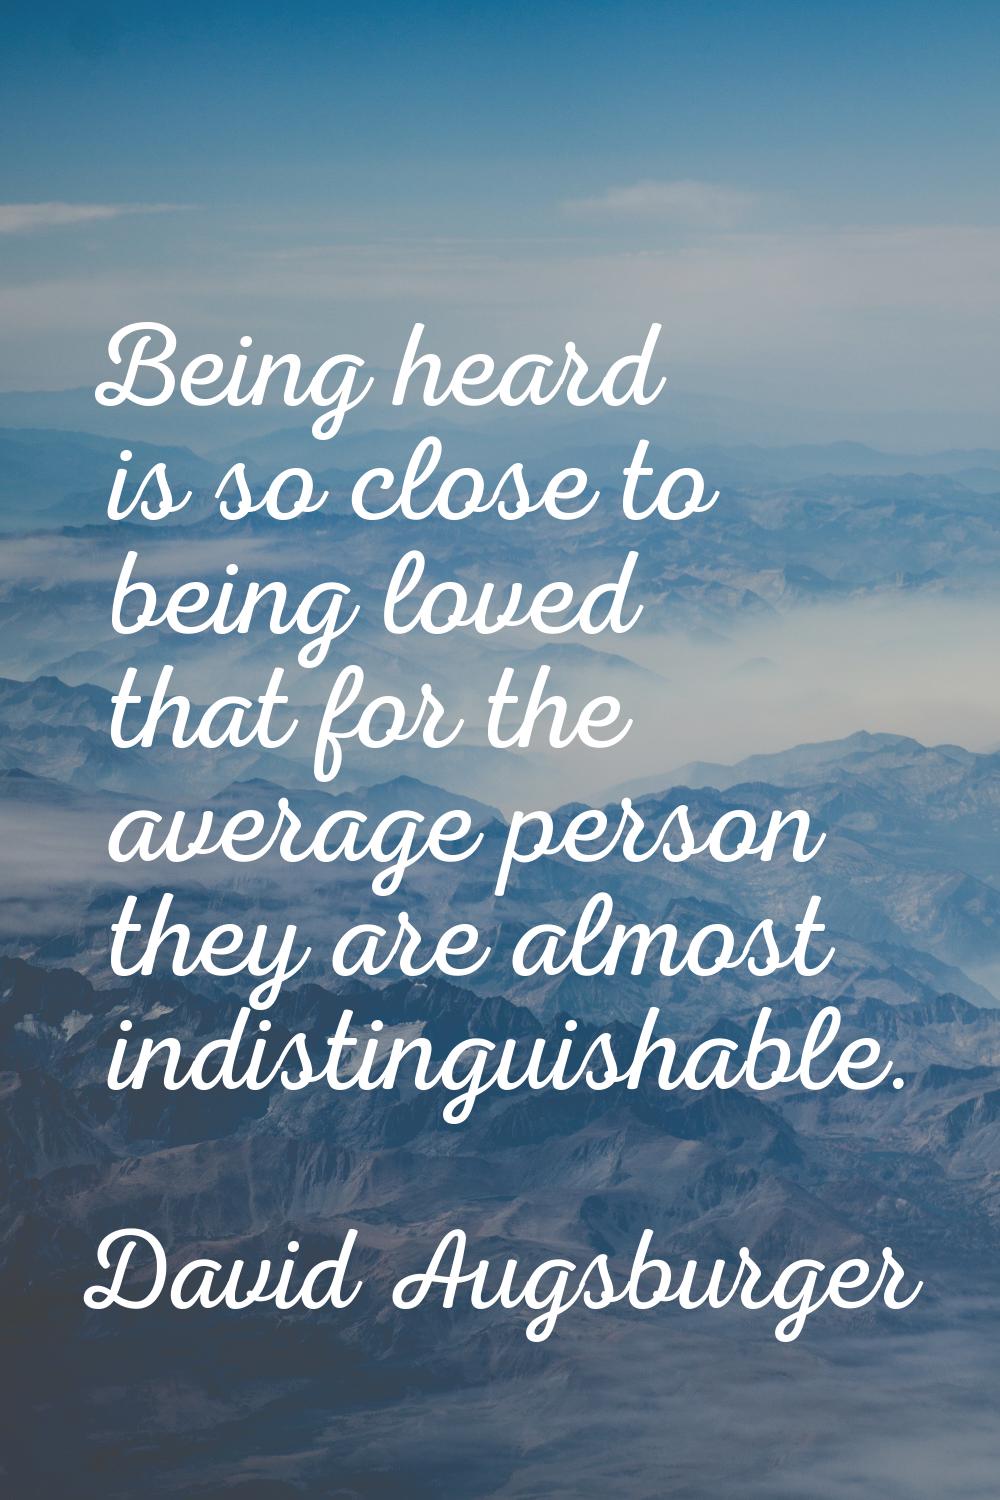 Being heard is so close to being loved that for the average person they are almost indistinguishabl